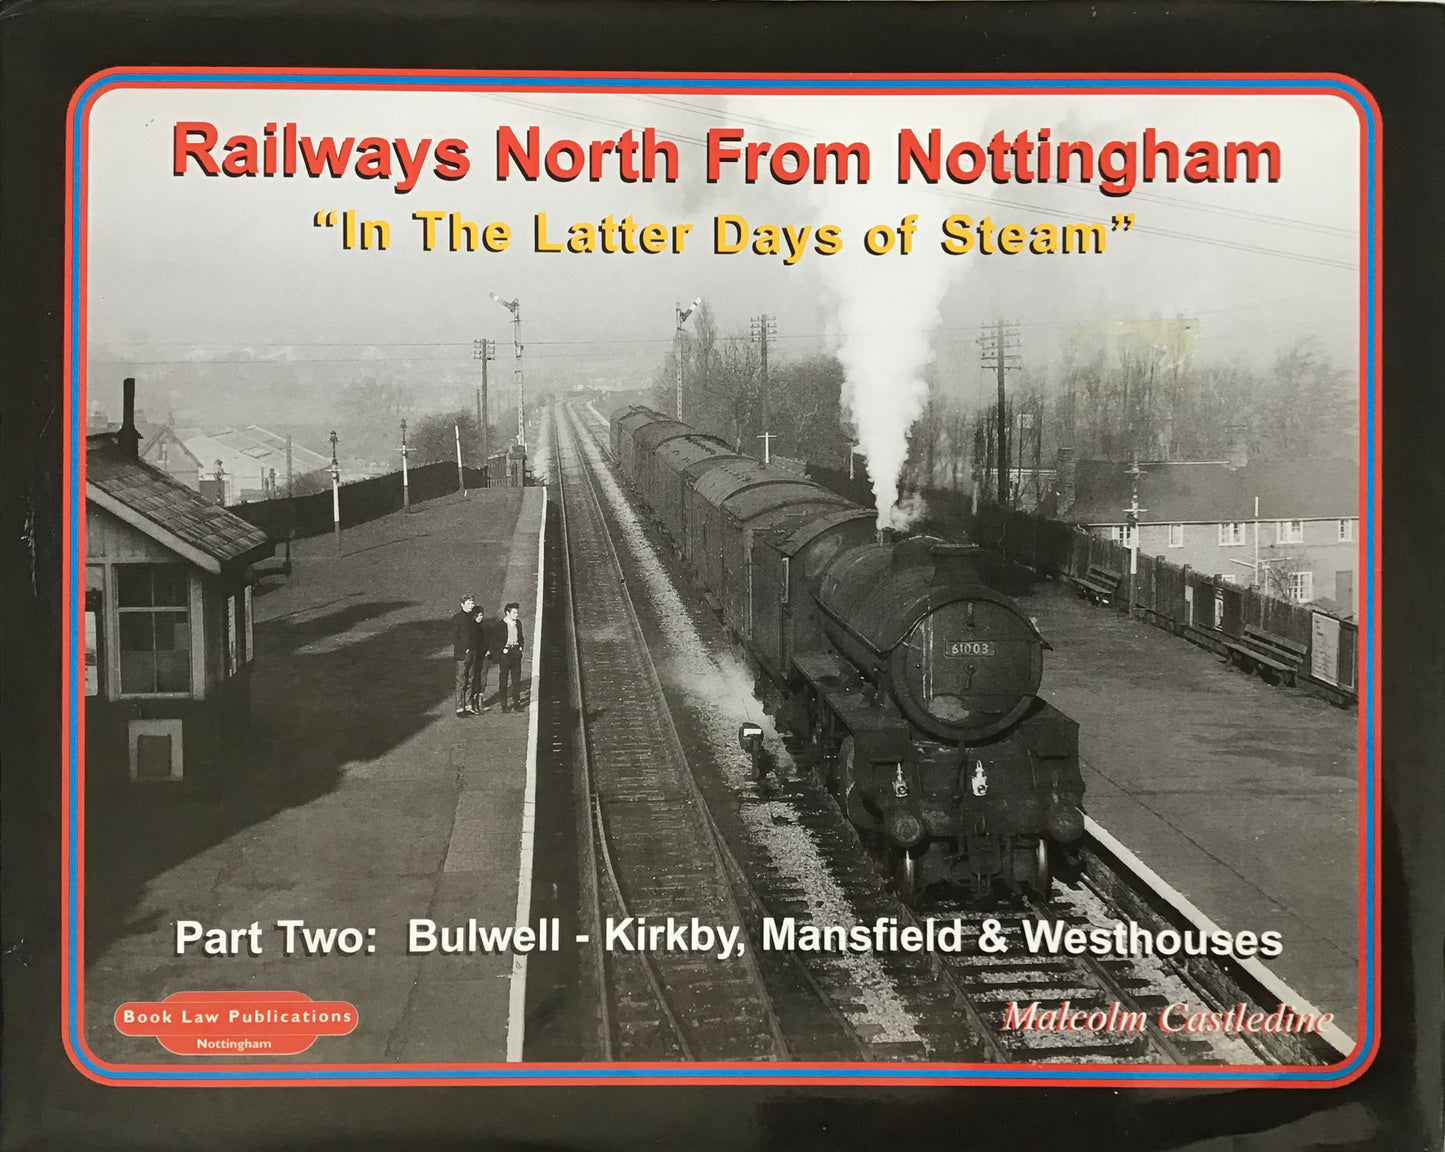 Railways North From Nottingham “In the Latter Days of Steam” Part Two - Malecolm Castledine - Chester Model Centre